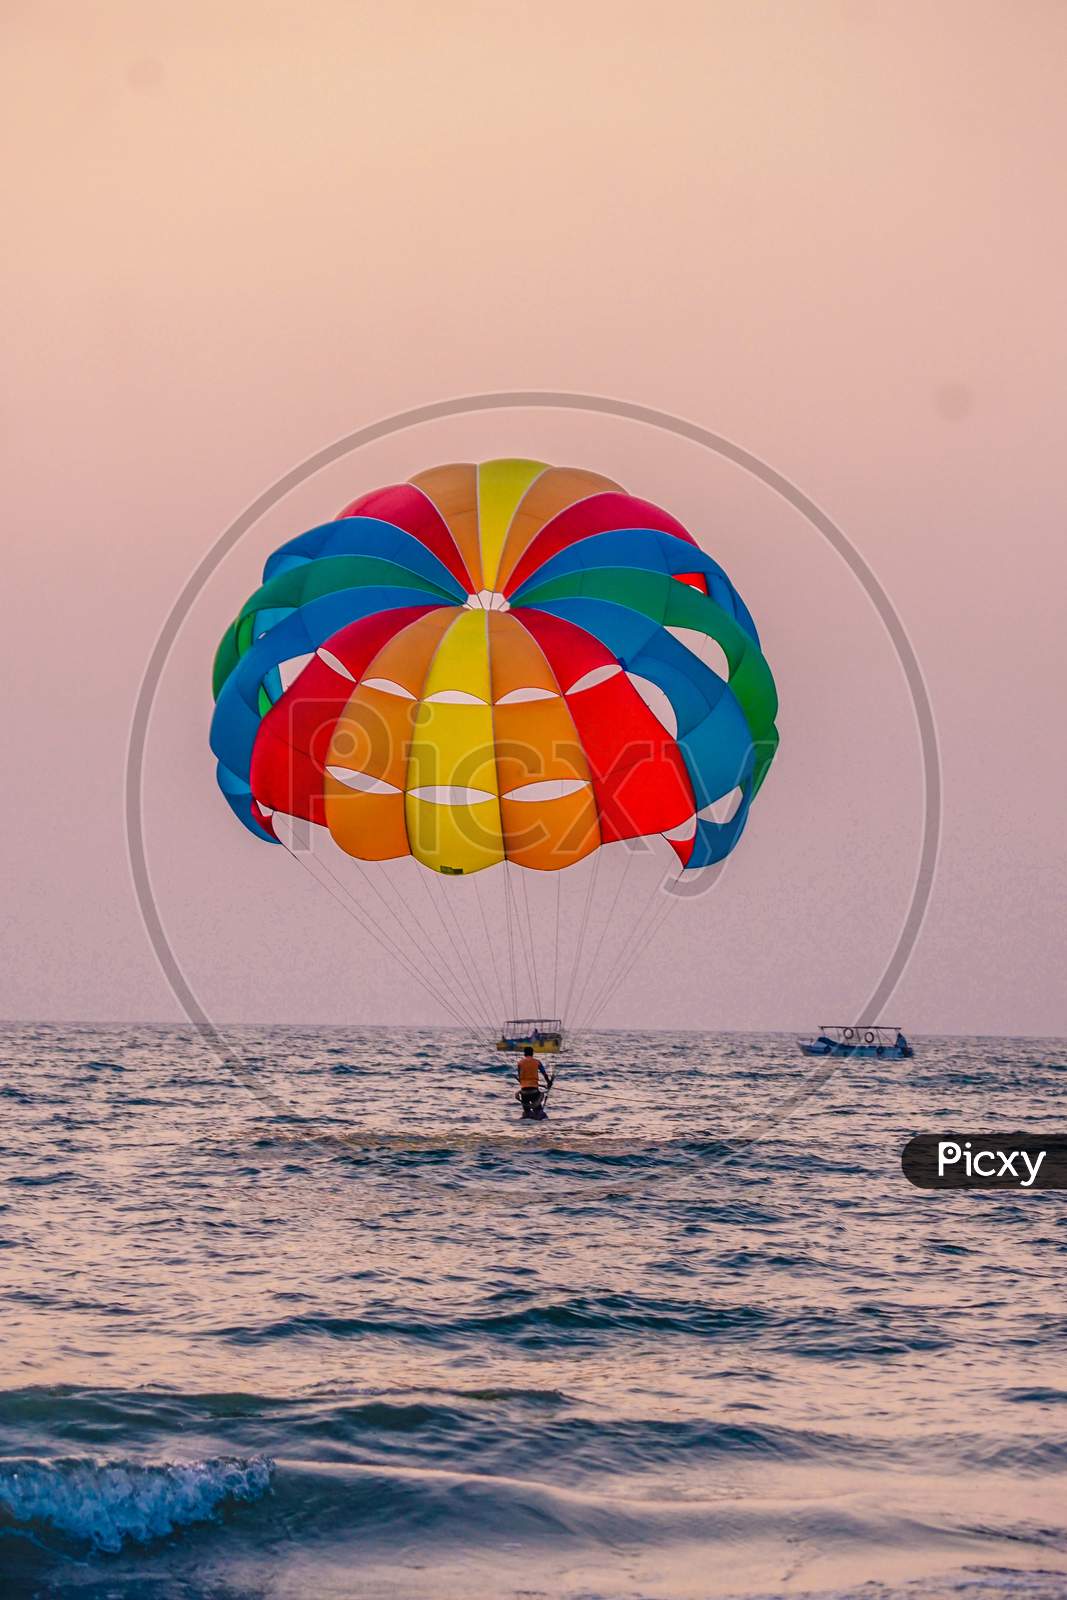 View of Indian Tourist Paragliding in the beach